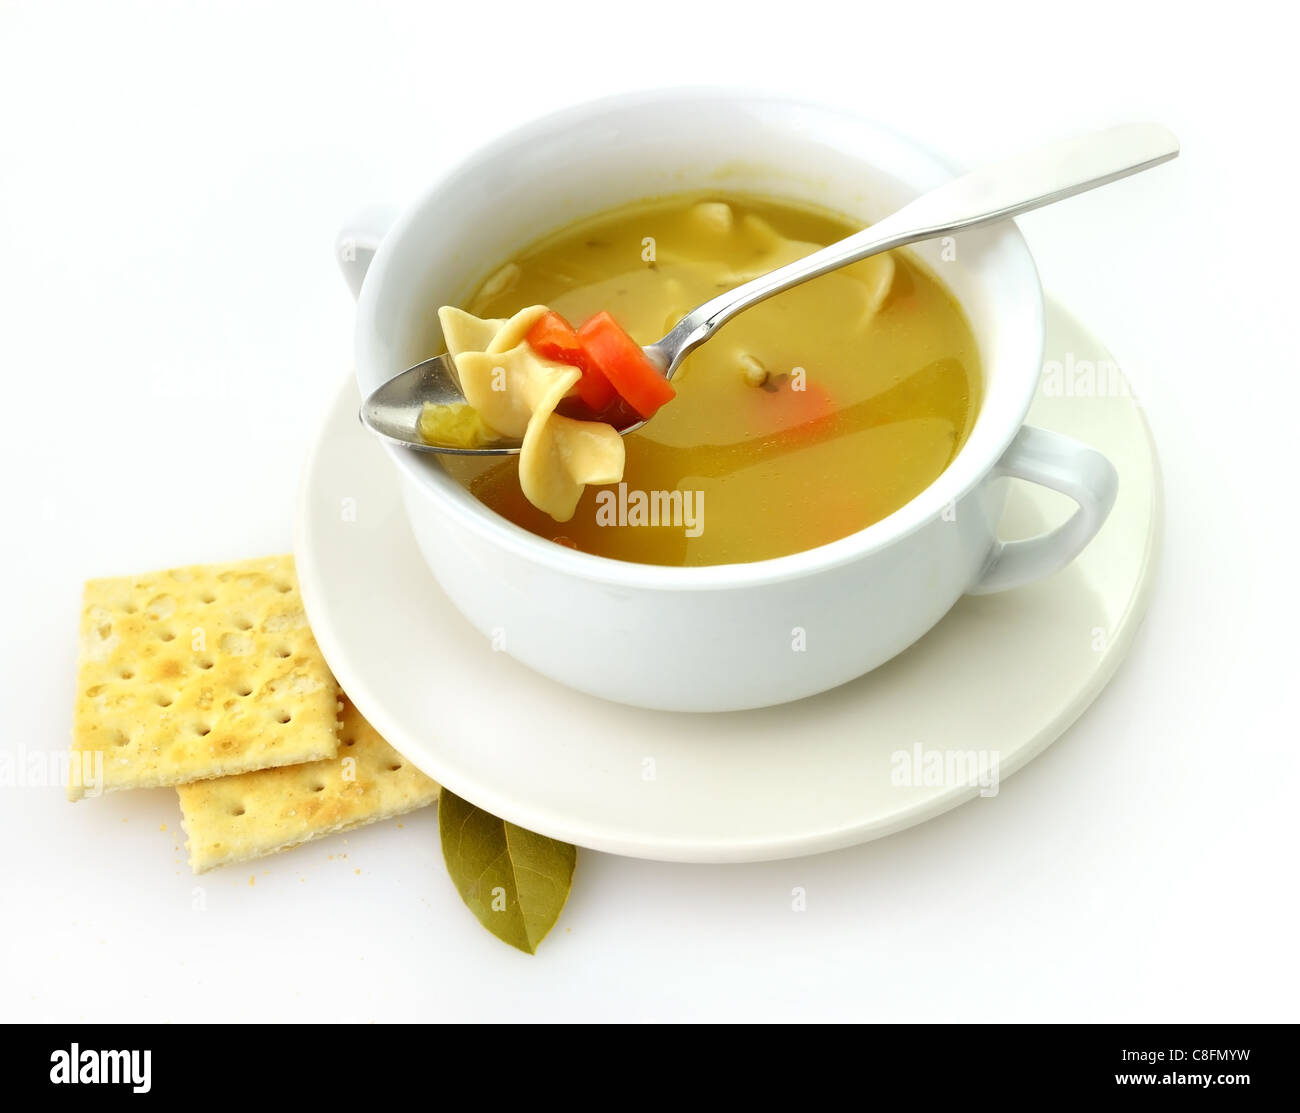 https://c8.alamy.com/comp/C8FMYW/chicken-noodle-soup-in-a-white-cup-with-crackers-C8FMYW.jpg